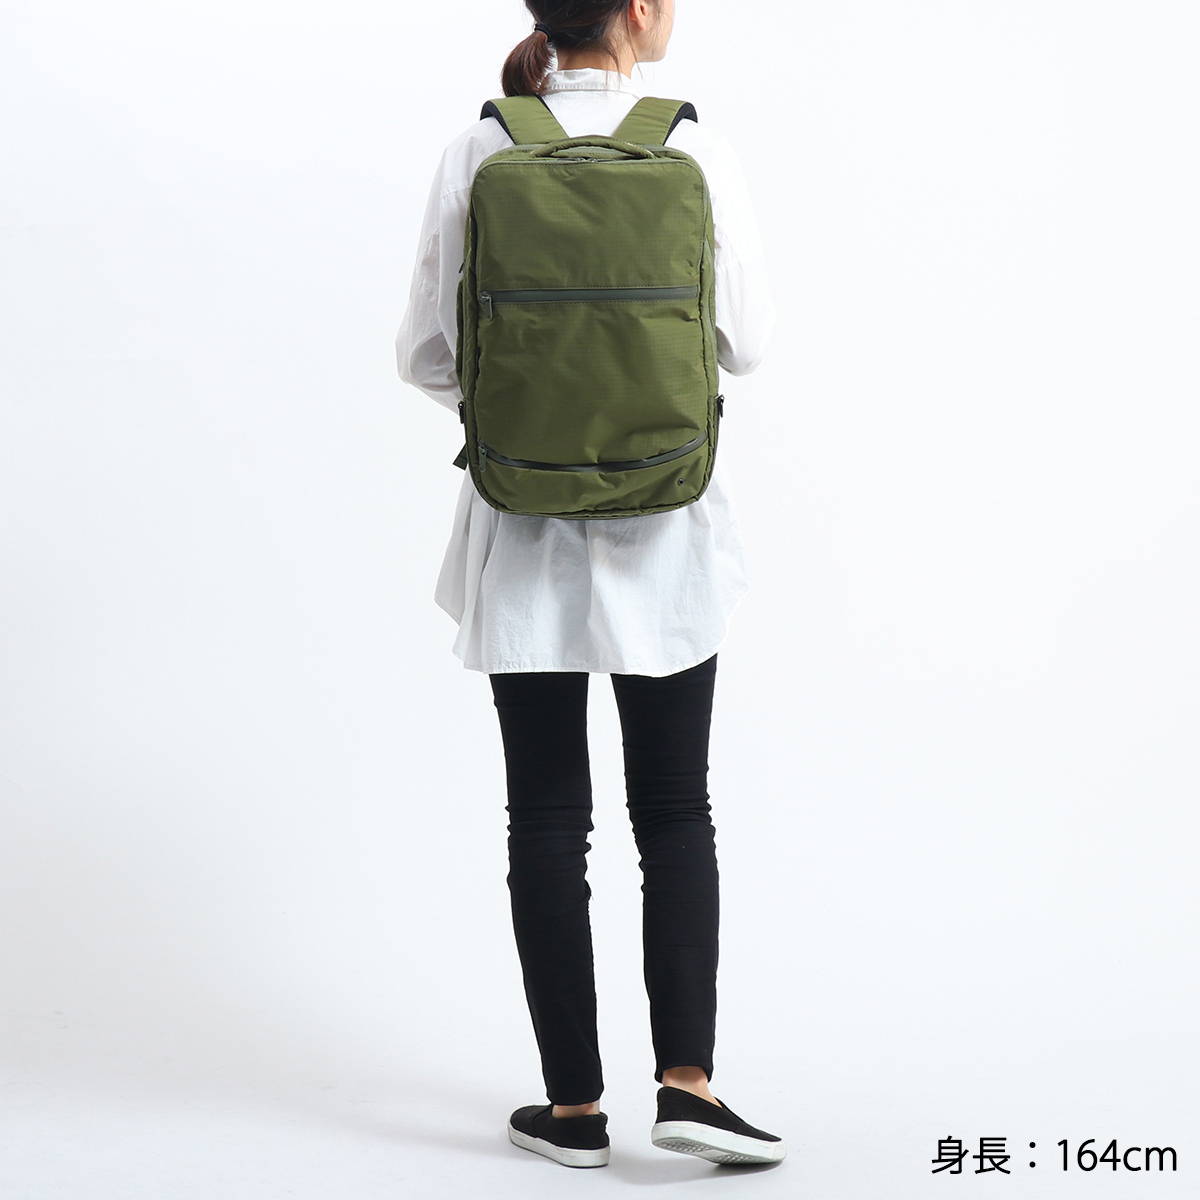 ★SML リュック　BUSINESS RUCK SACK B4 rip-stop